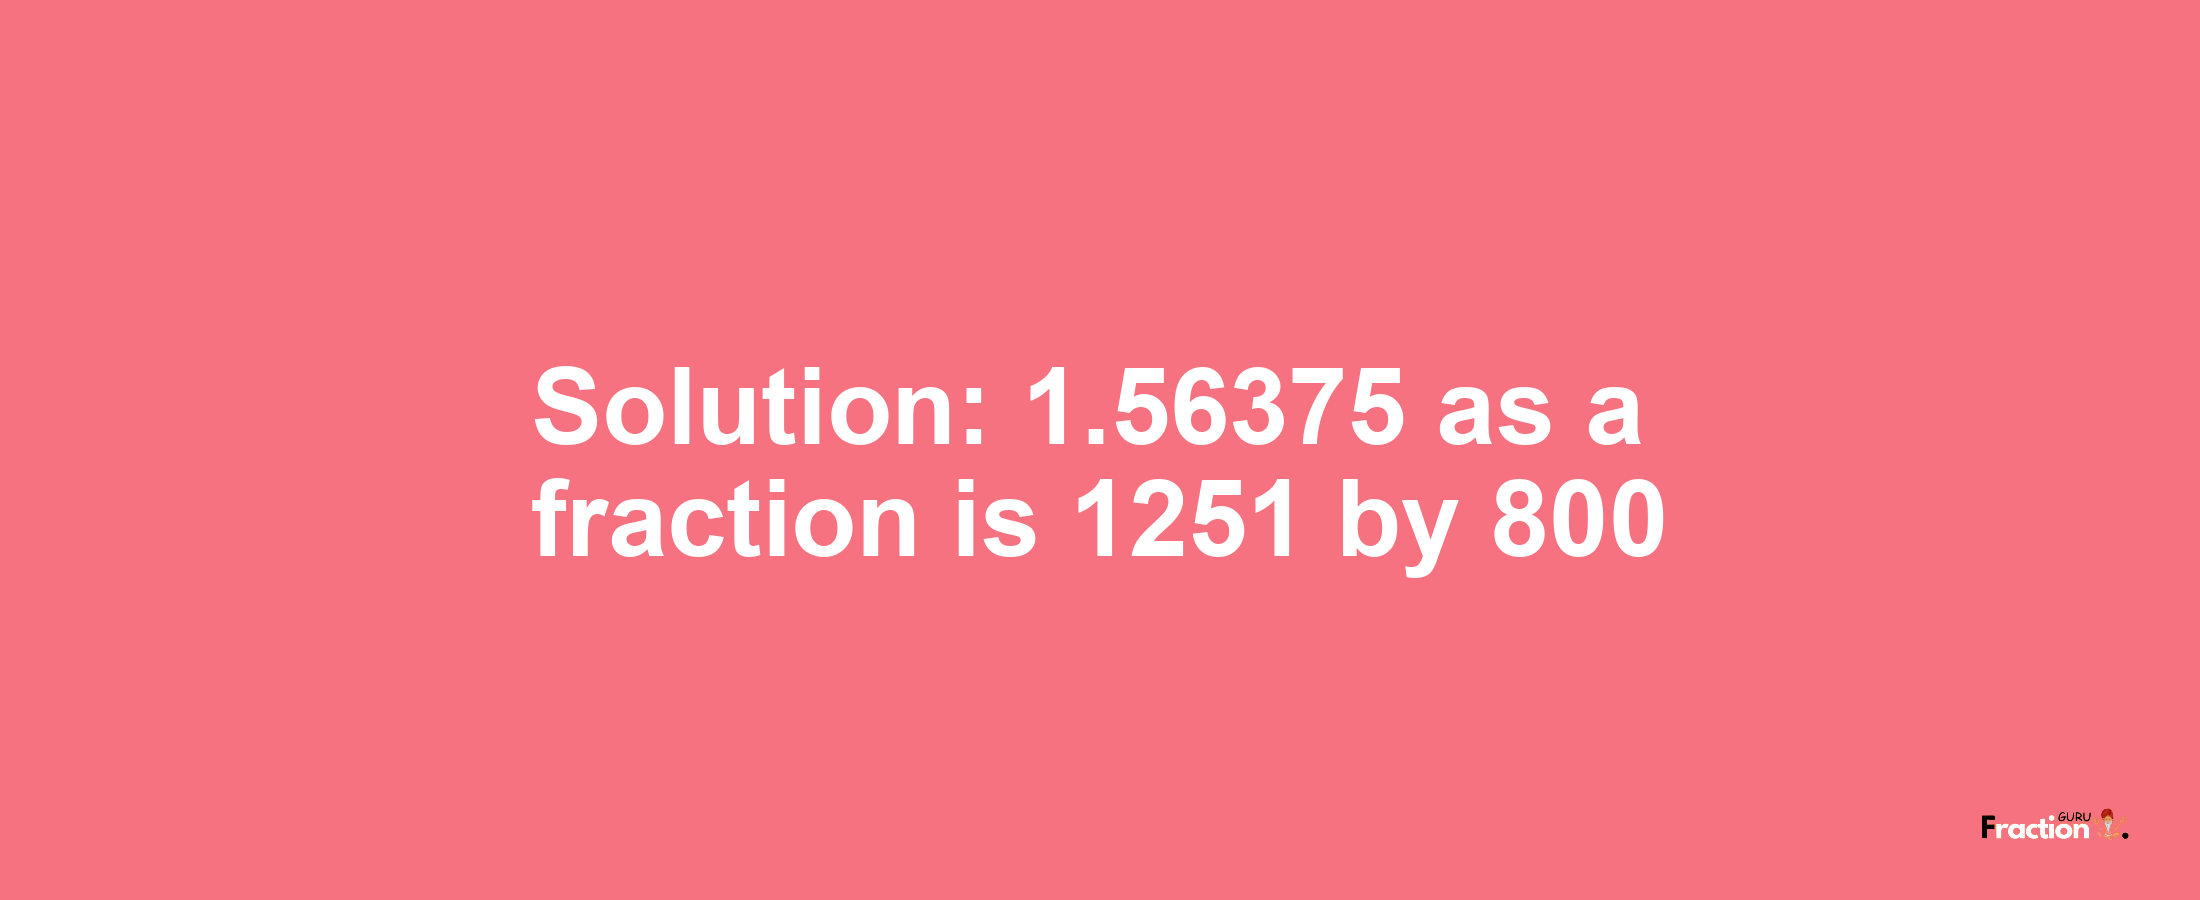 Solution:1.56375 as a fraction is 1251/800